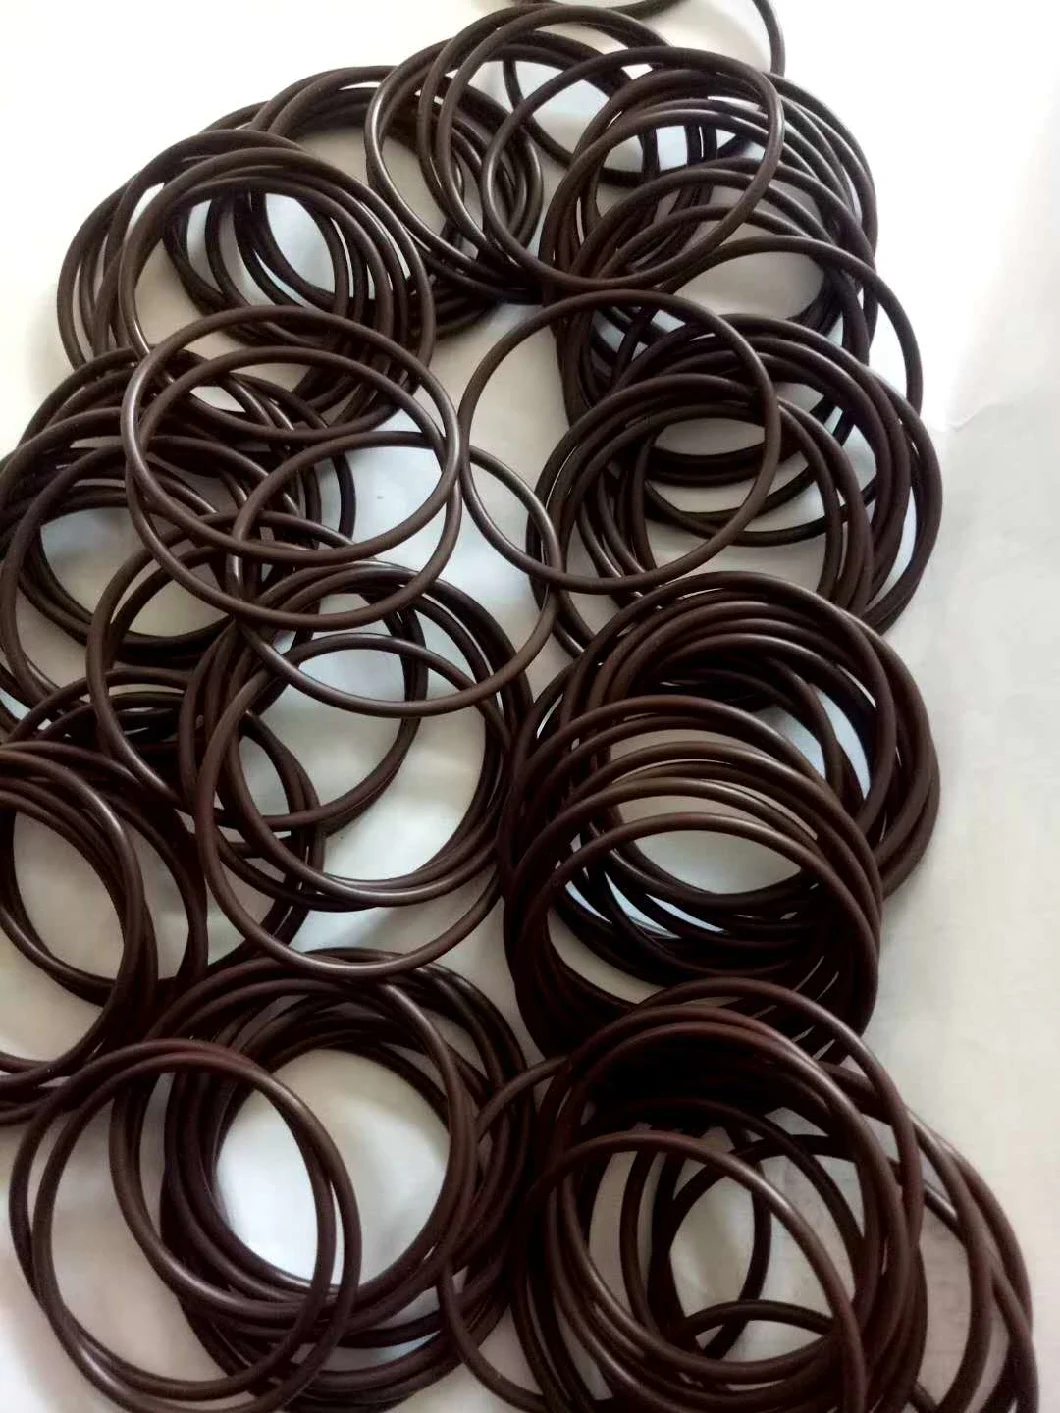 Extruded Good Quality Rubber Seals Rings OEM EPDM Natural Elastic Rubber Seal Ring